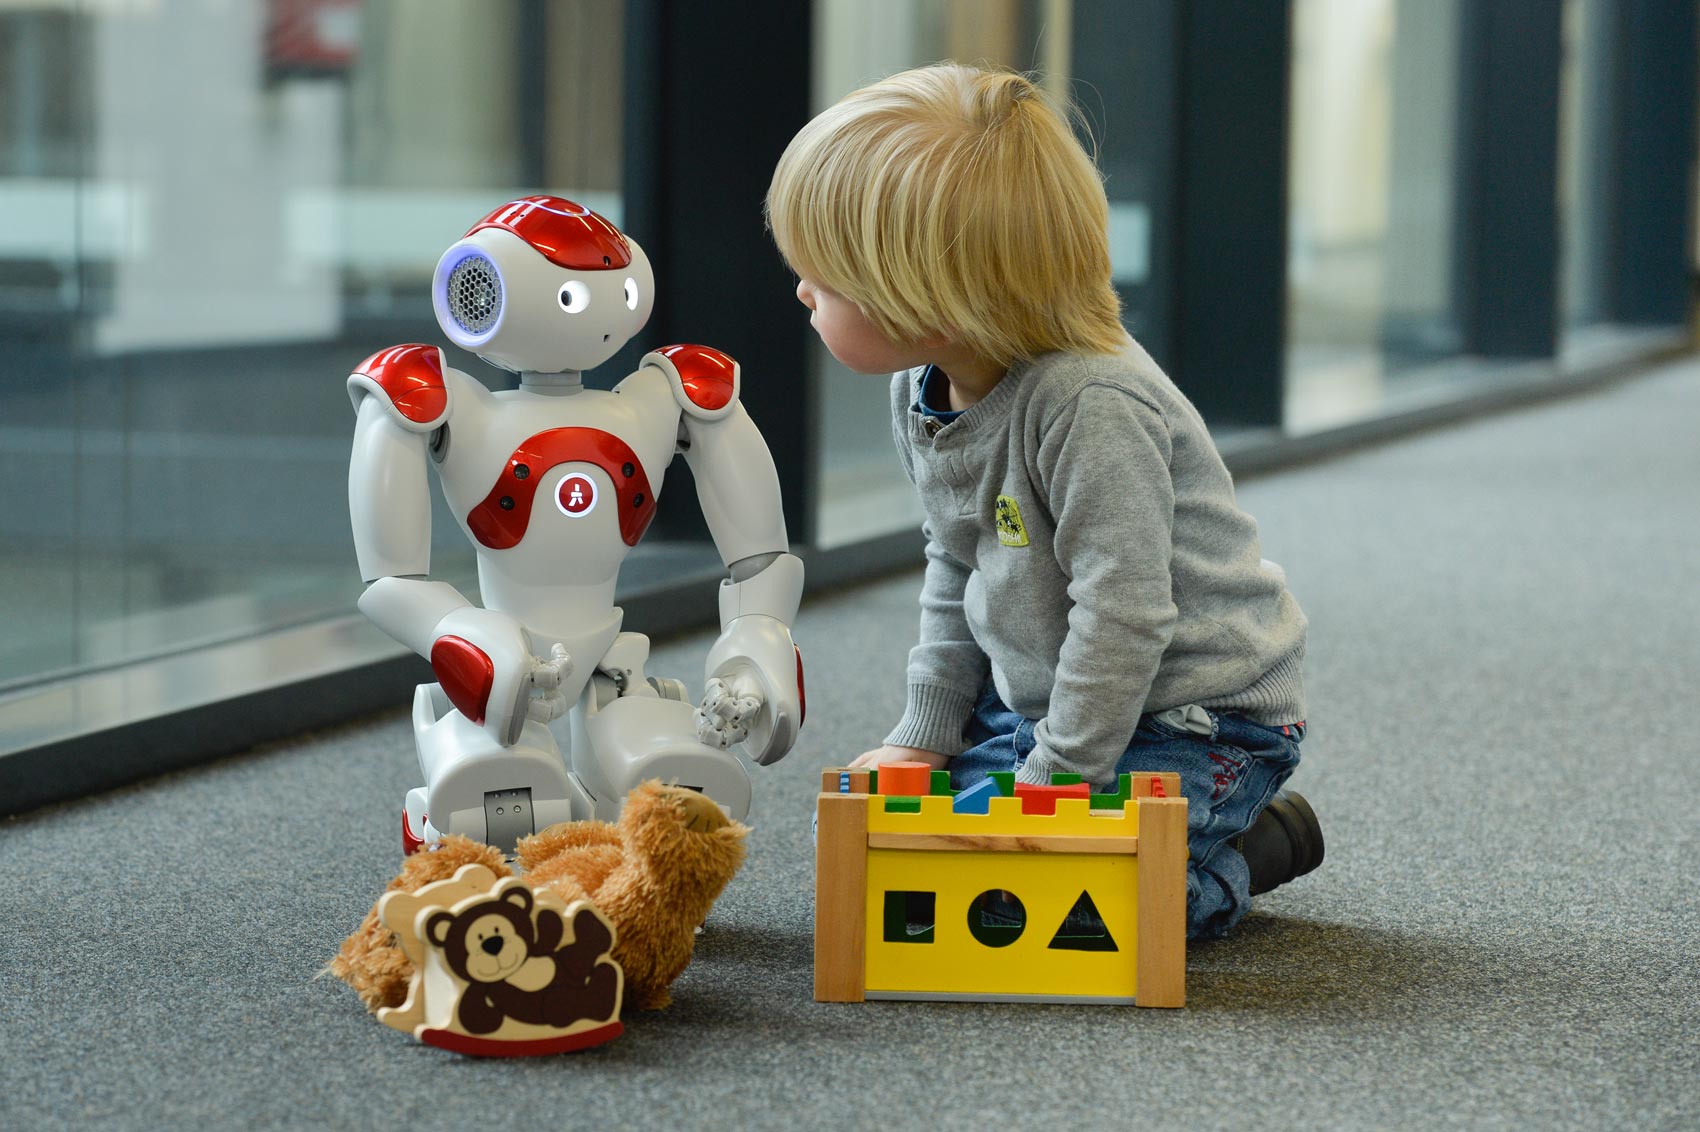 Child and roboter playing together